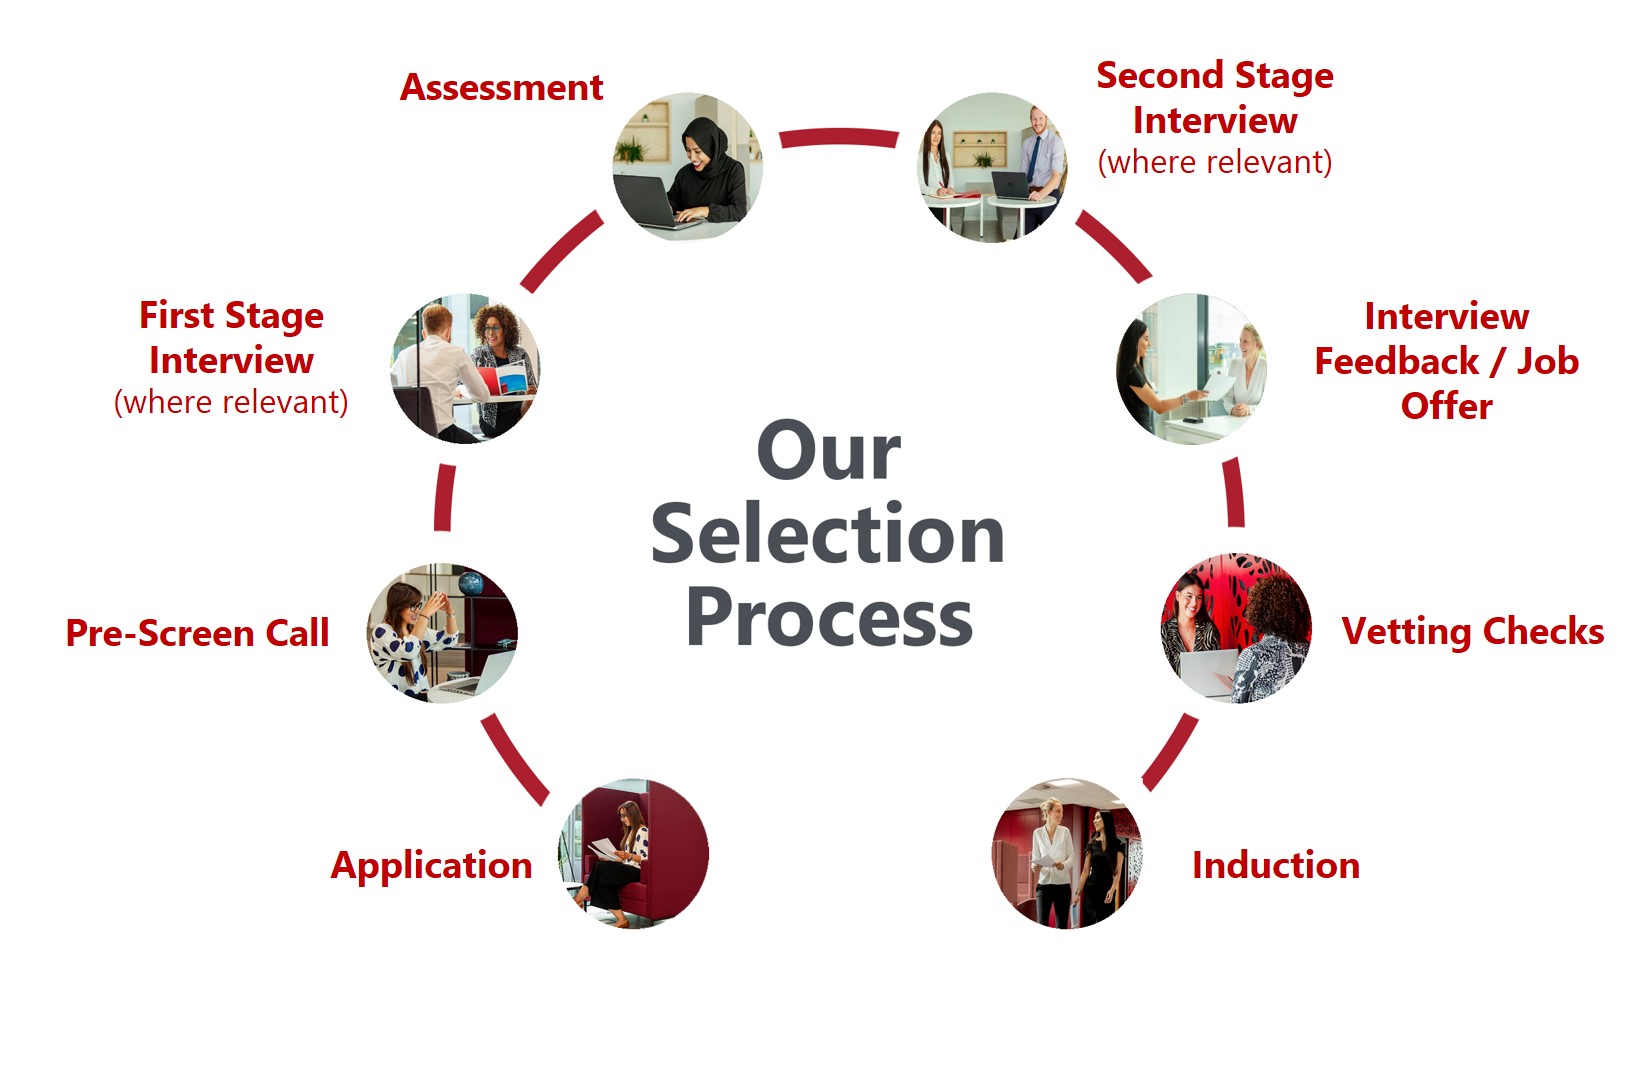 Our selection process